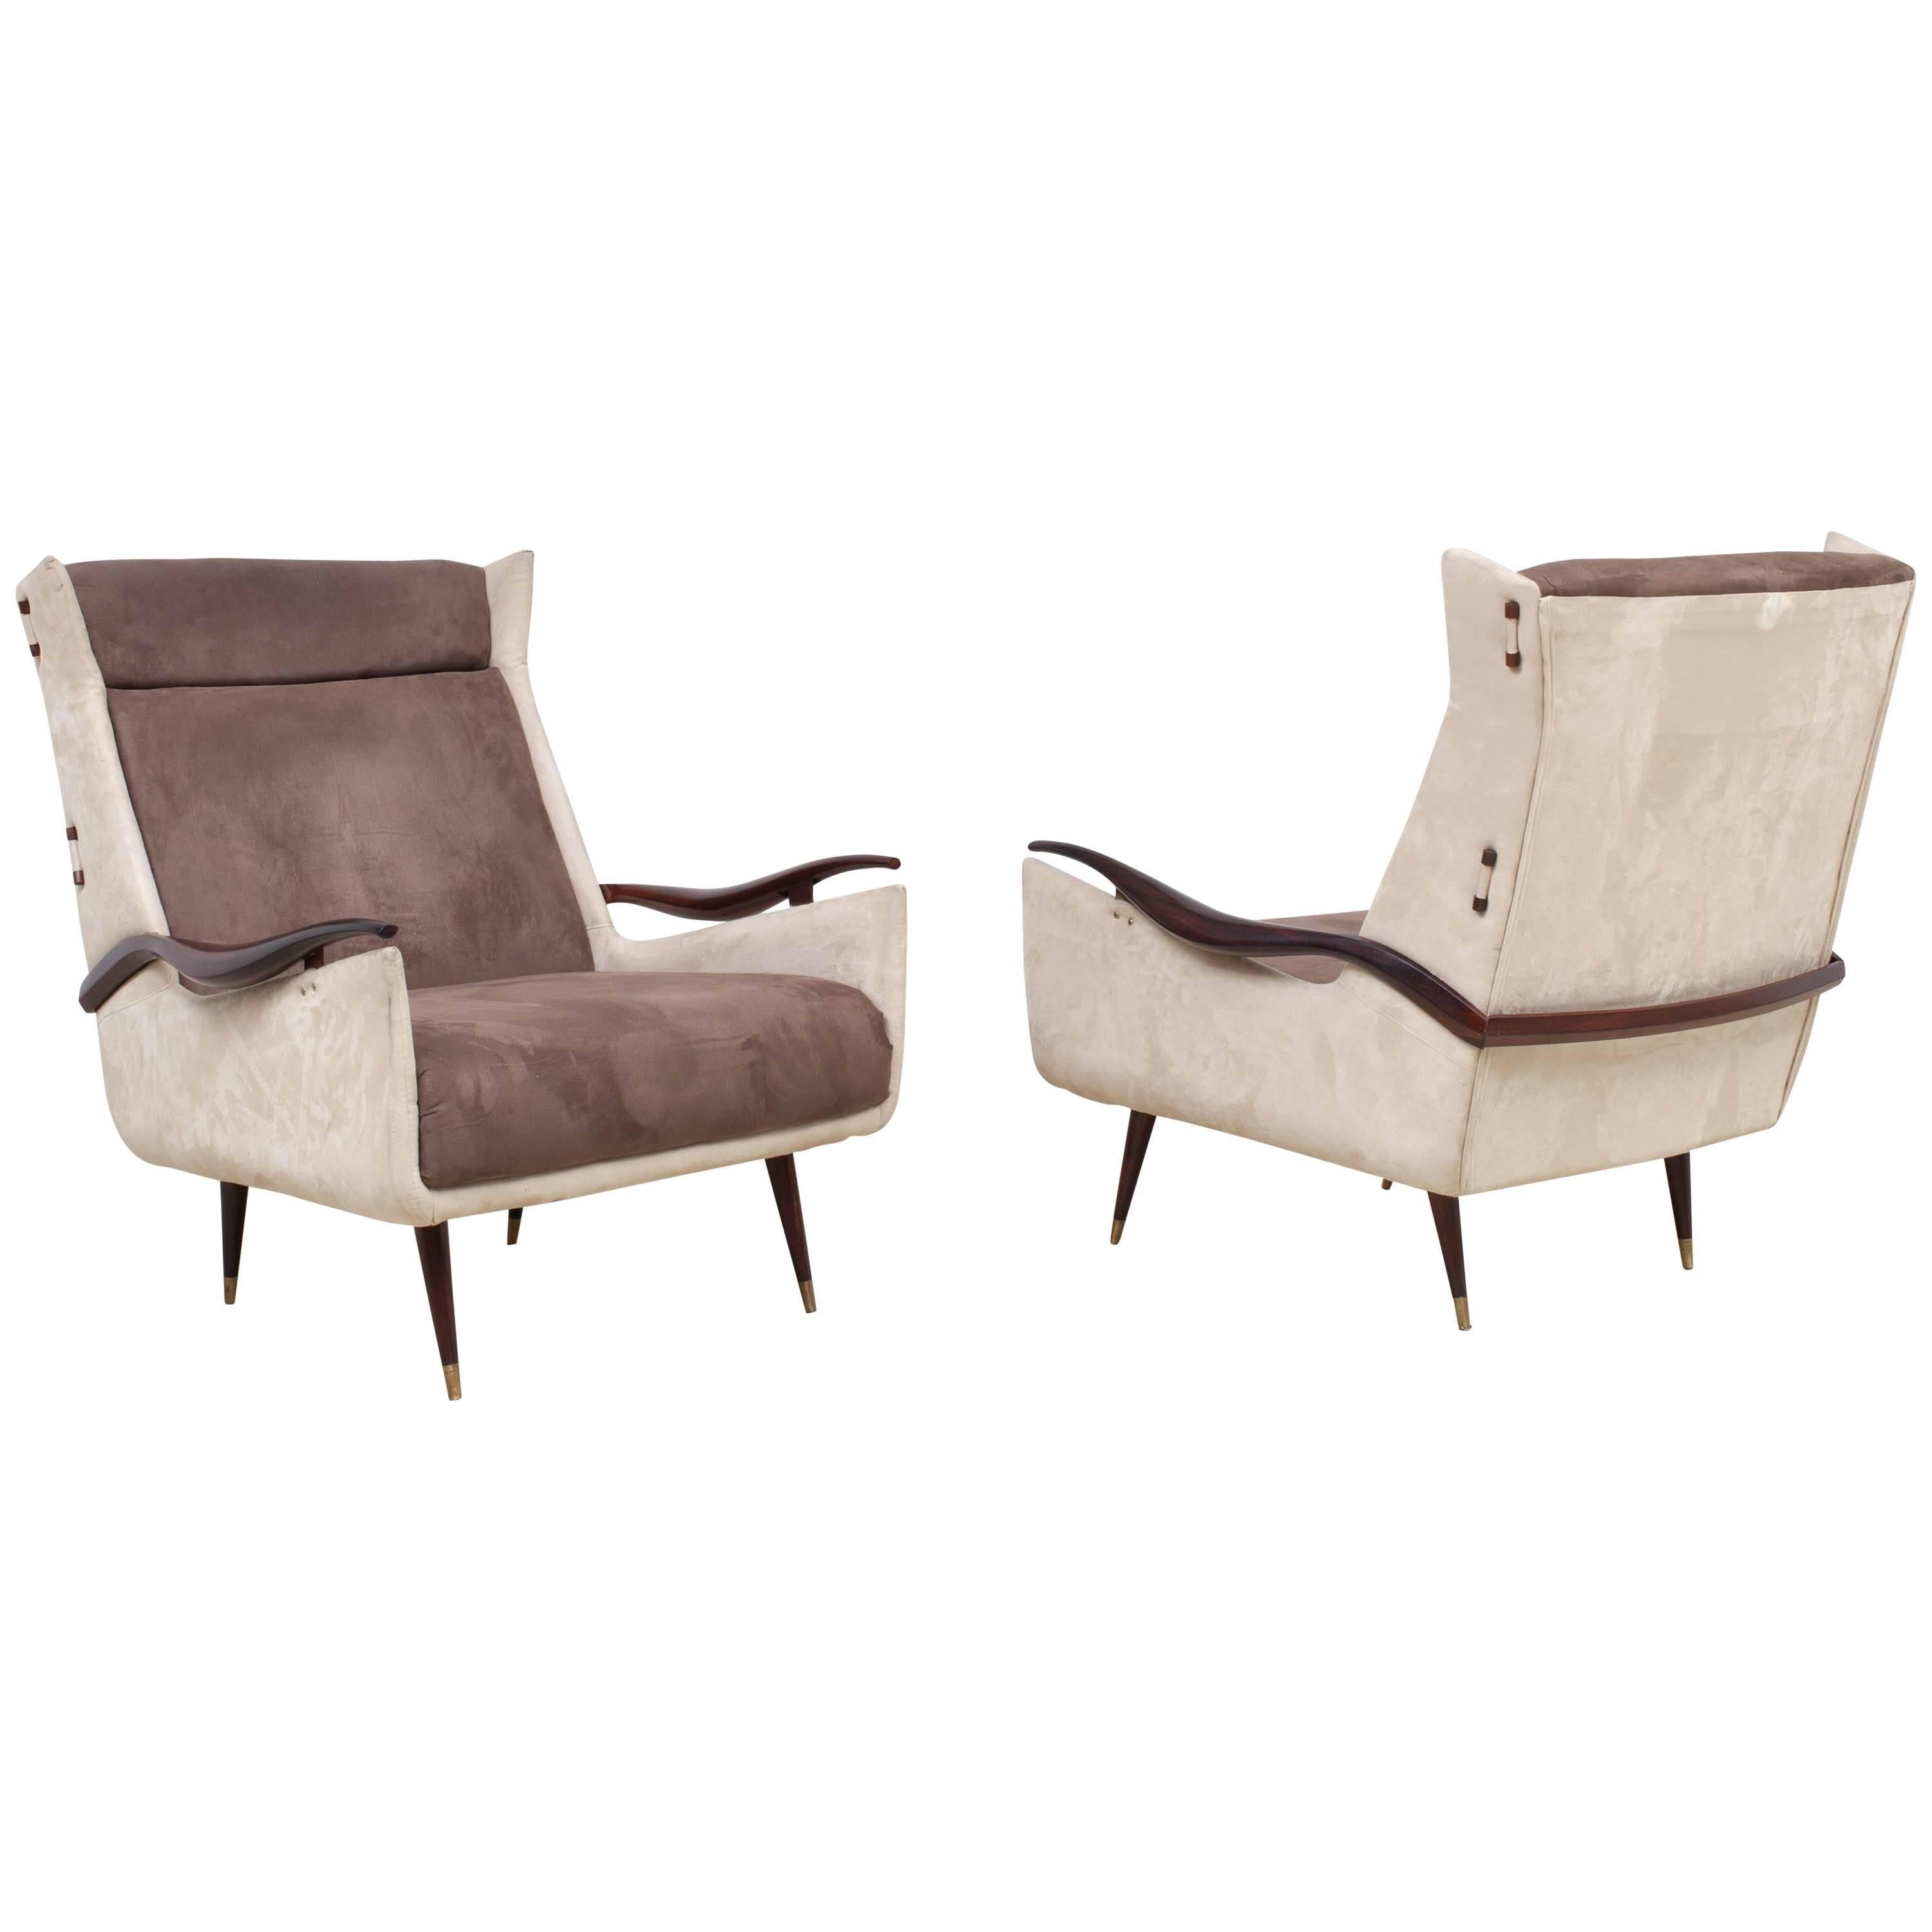 Two-Tone High Chairs by Jorge Zalszupin For Sale